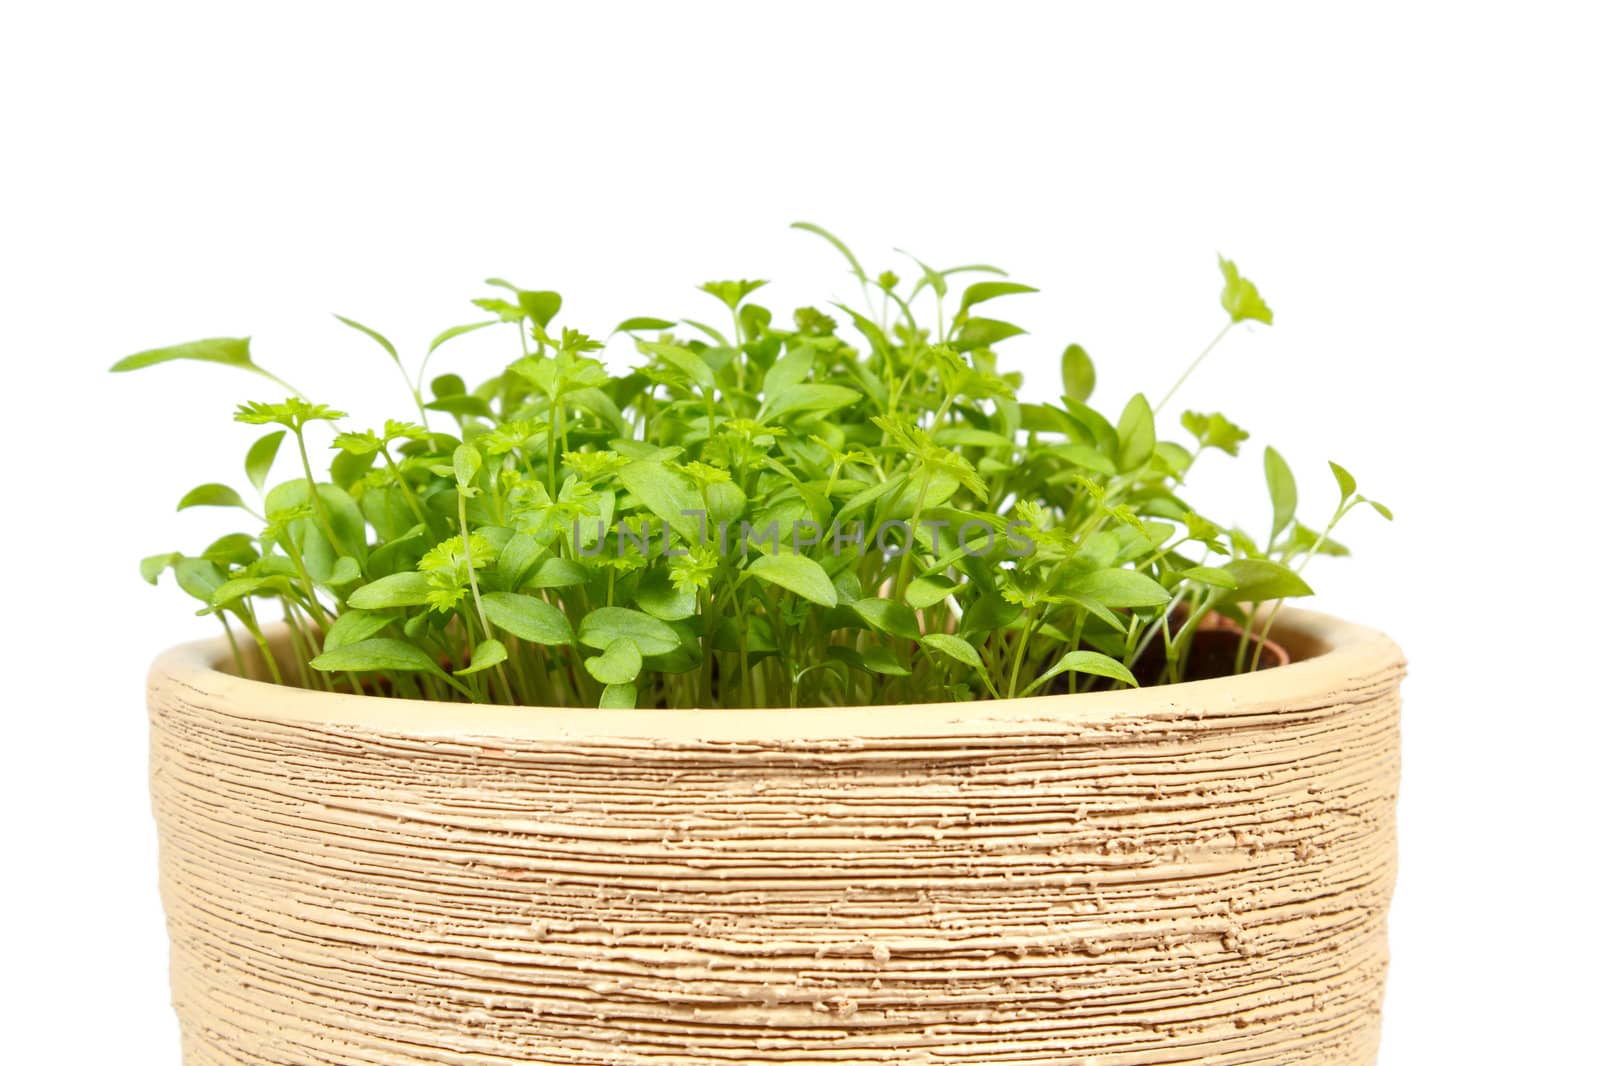 Spring vegetable in ceramic pot on a white background 